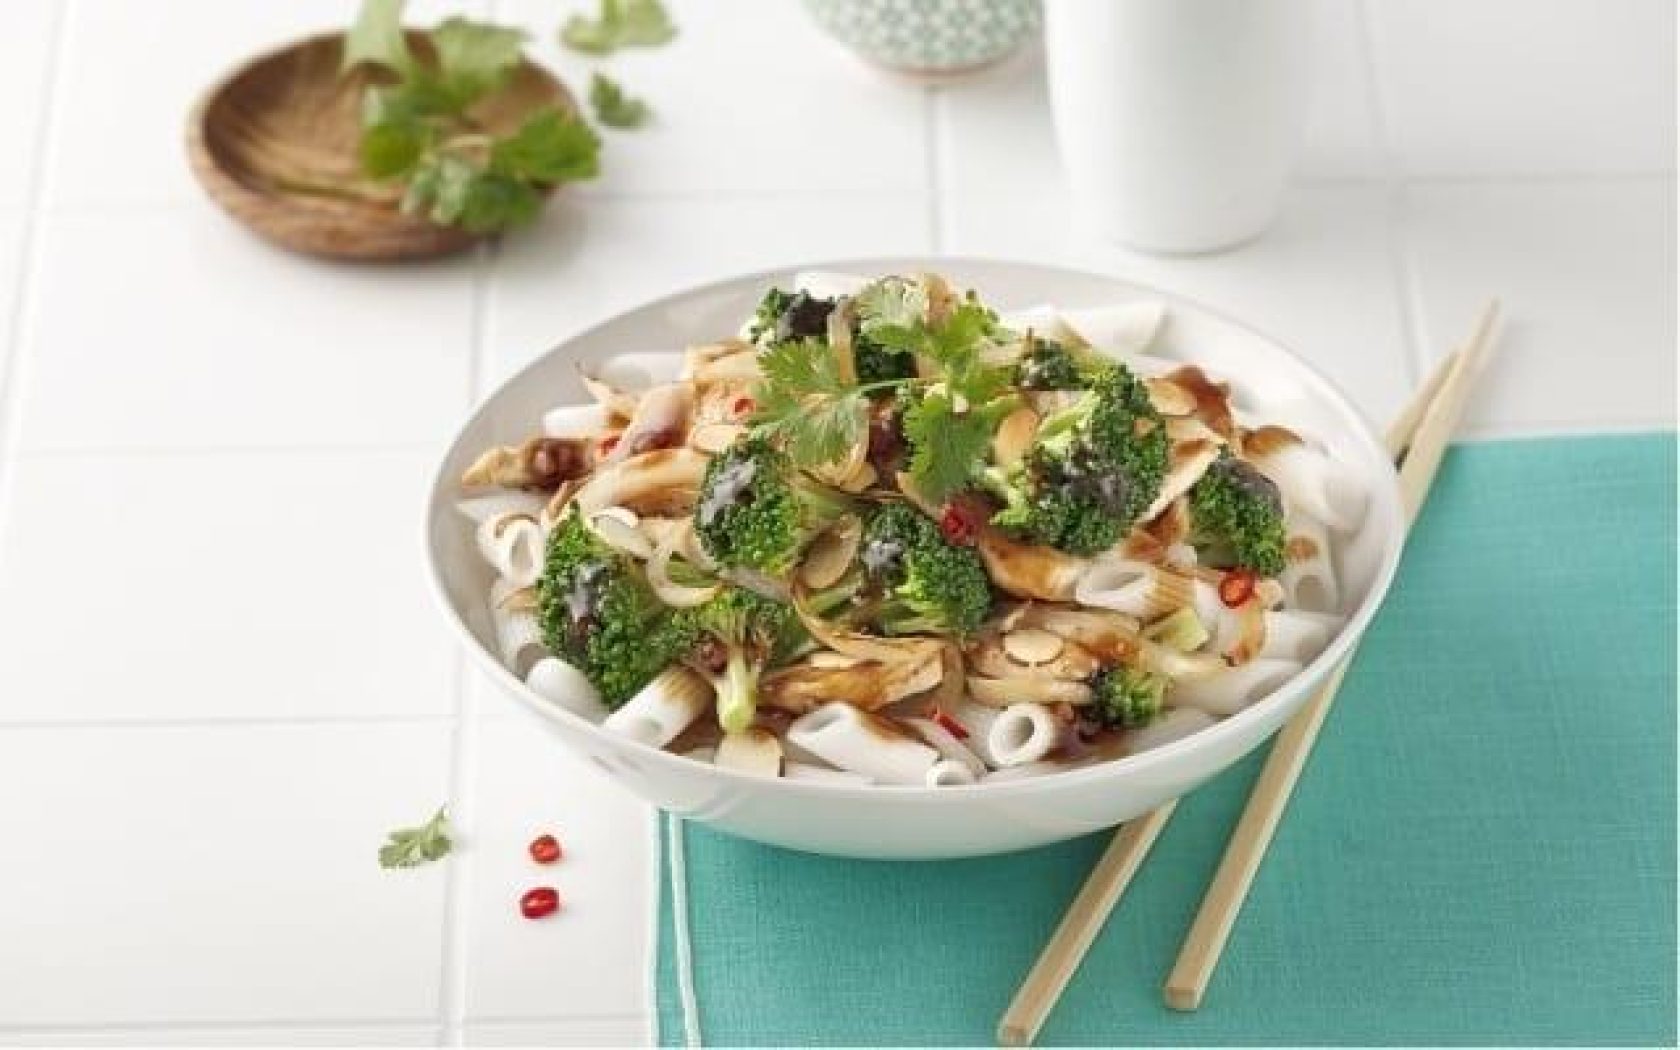 Broccoli and almond stir-fry with noodles